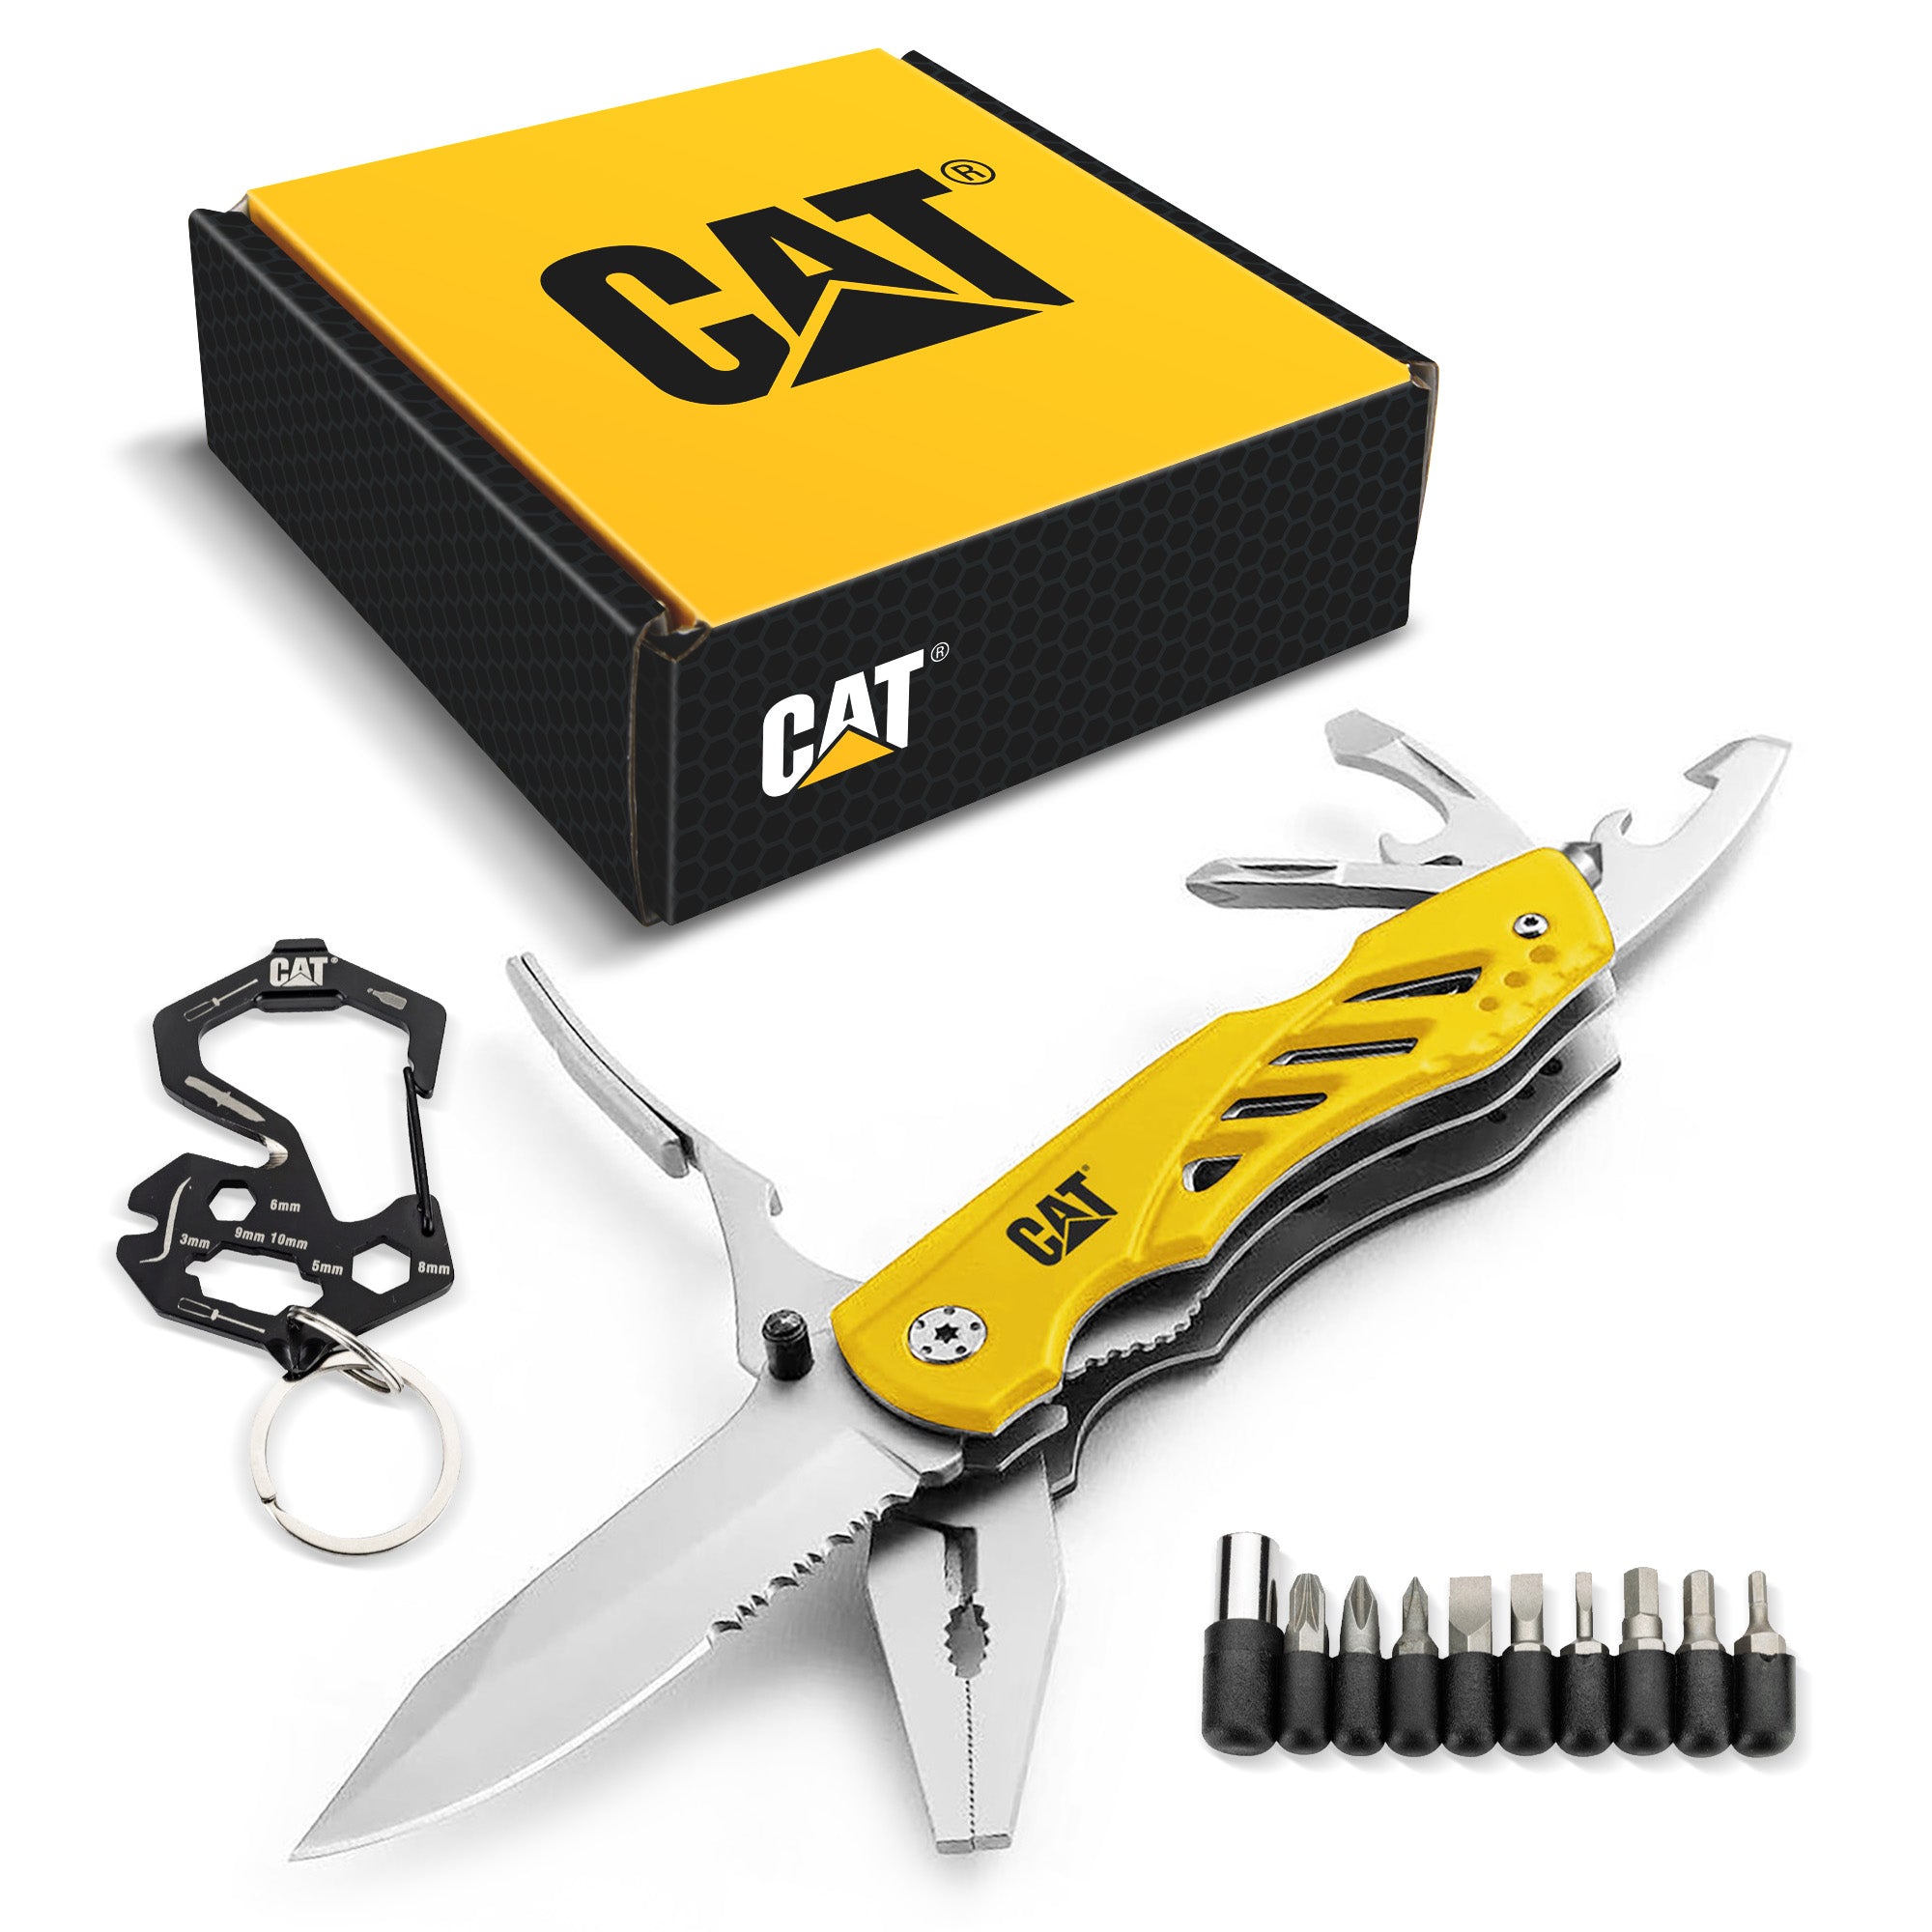 Cat / Real Tree 2 Piece Multi-Tool and Knife Gift Box Set with